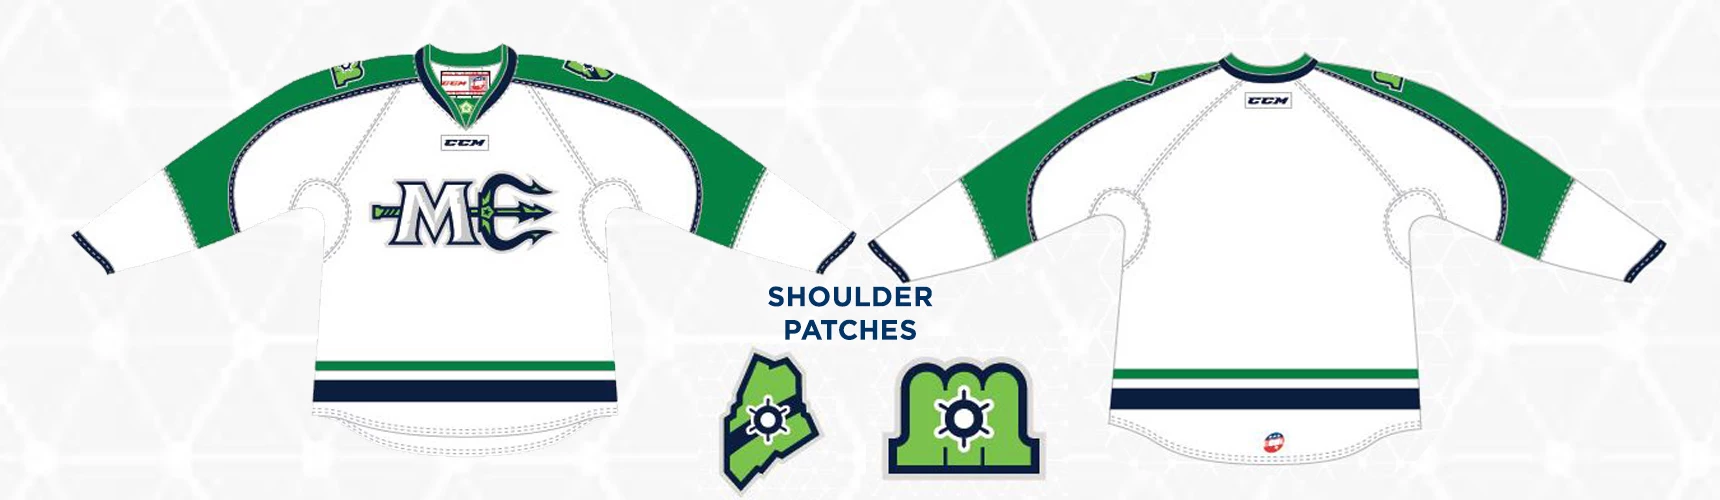 Maine Mariners unveil two new jerseys during homestand